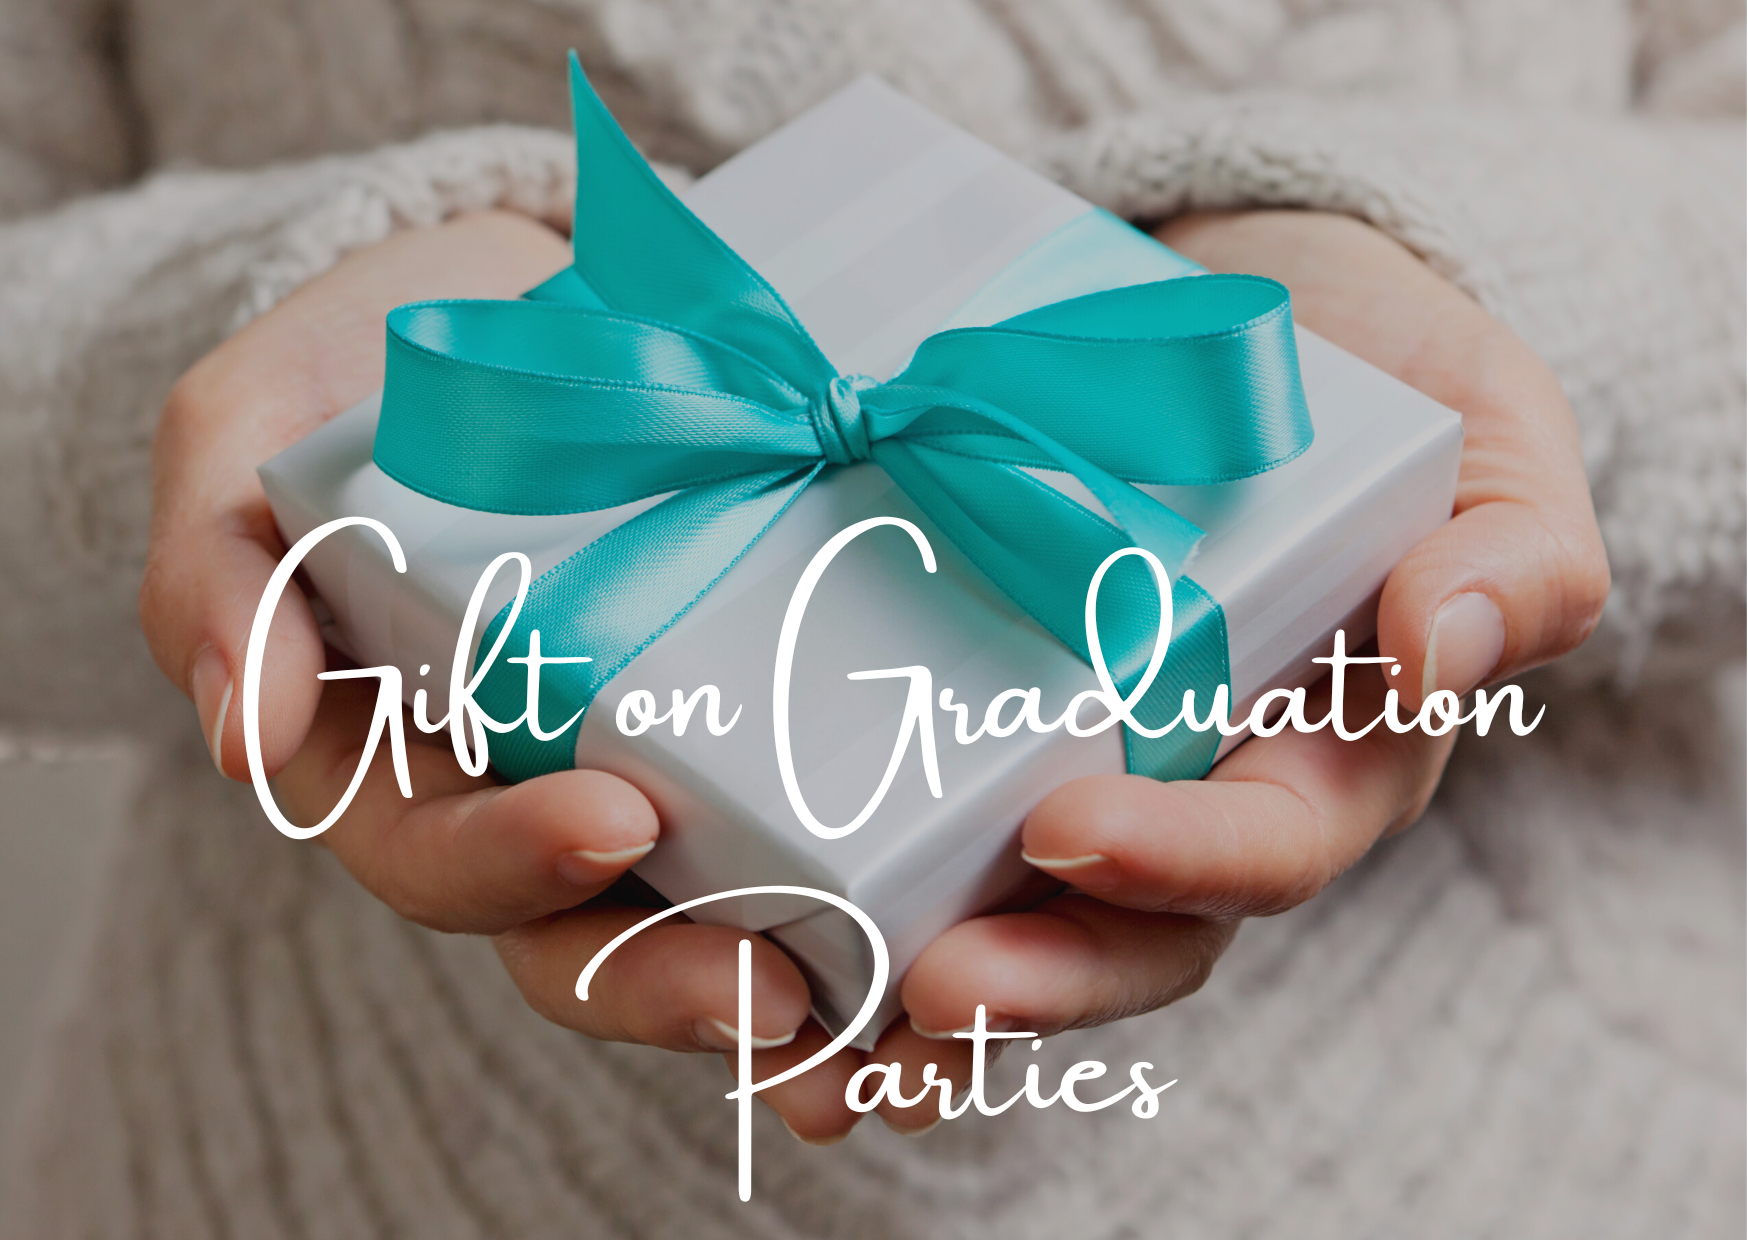 Should You Bring A Gift on Graduation Parties?